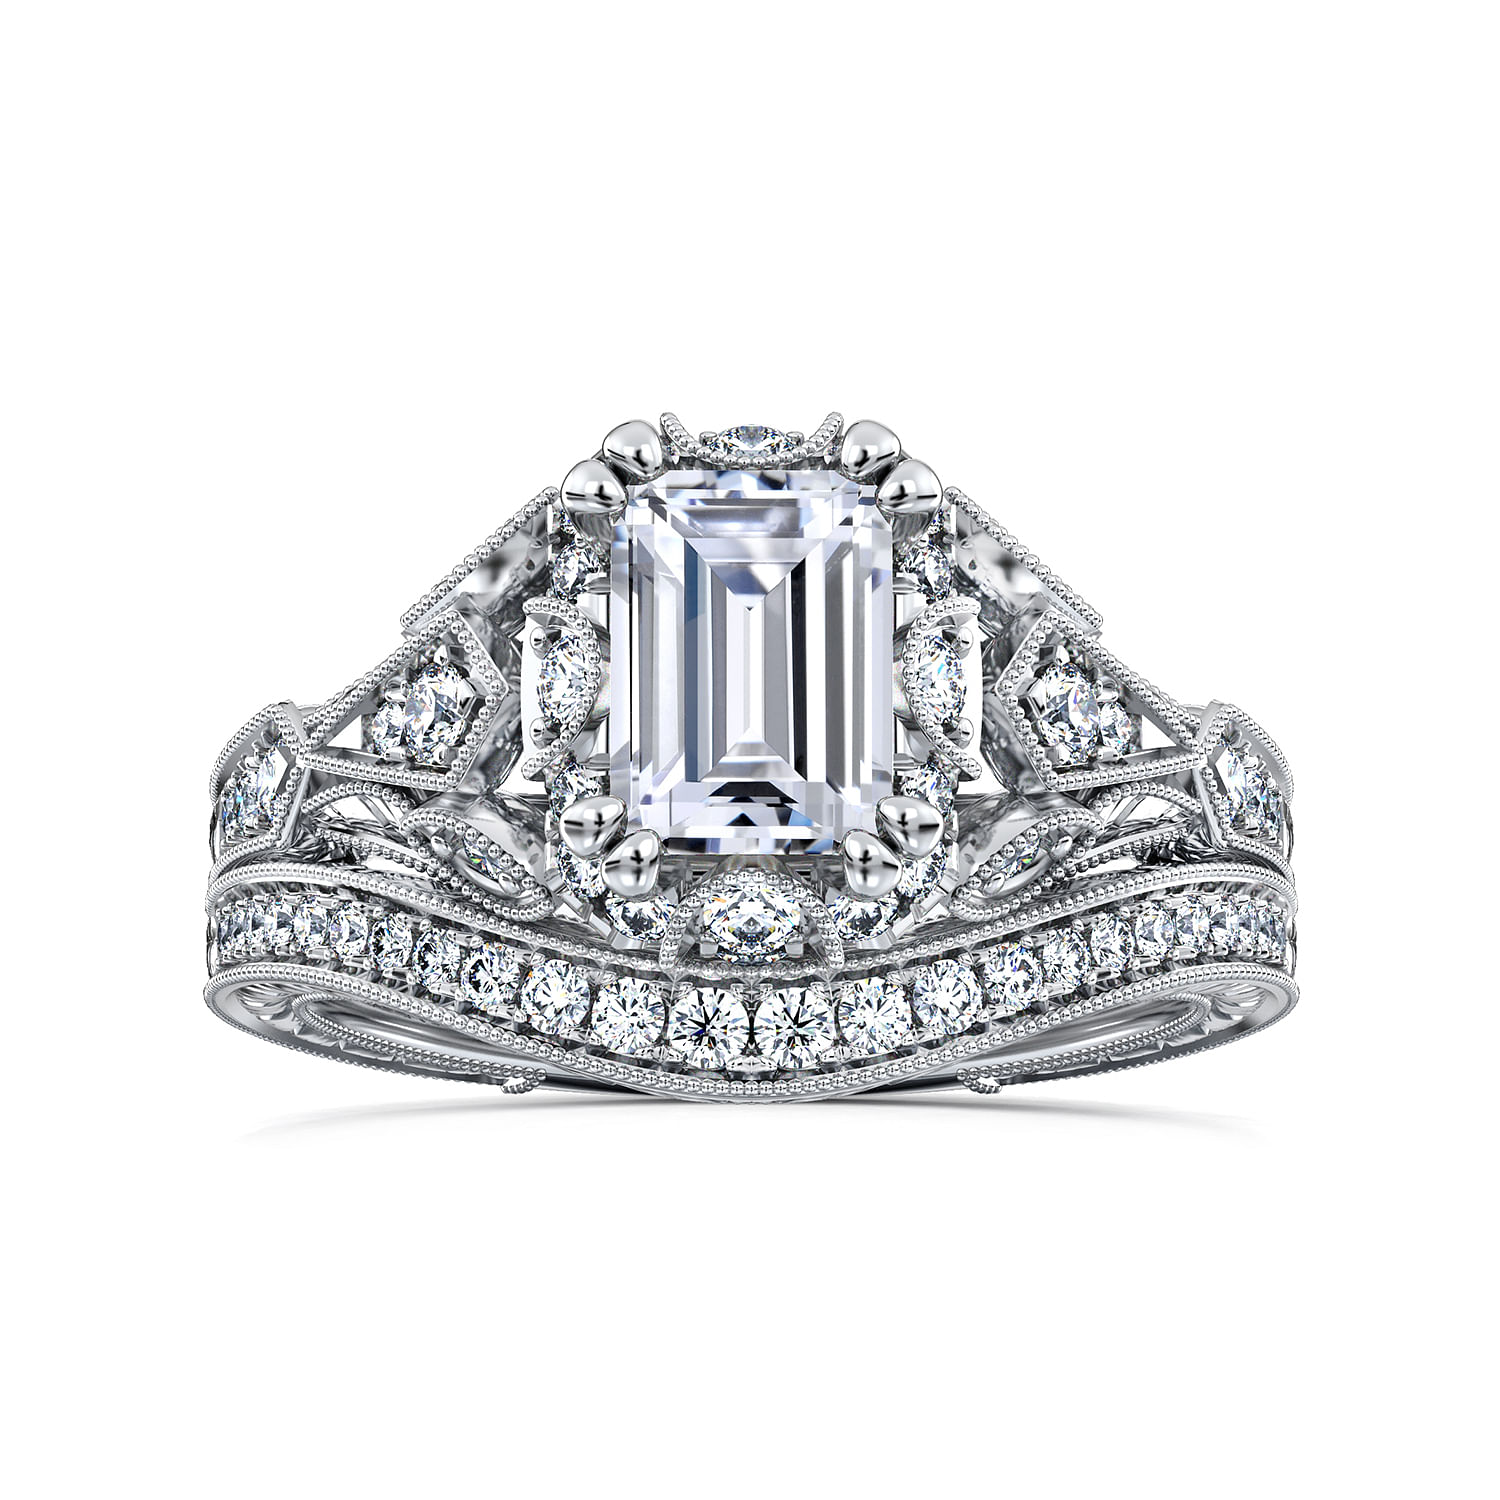 Annadale - Unique 14K White Gold Vintage Inspired Emerald Cut Diamond Halo Engagement Ring - 0.34 ct - Shot 4